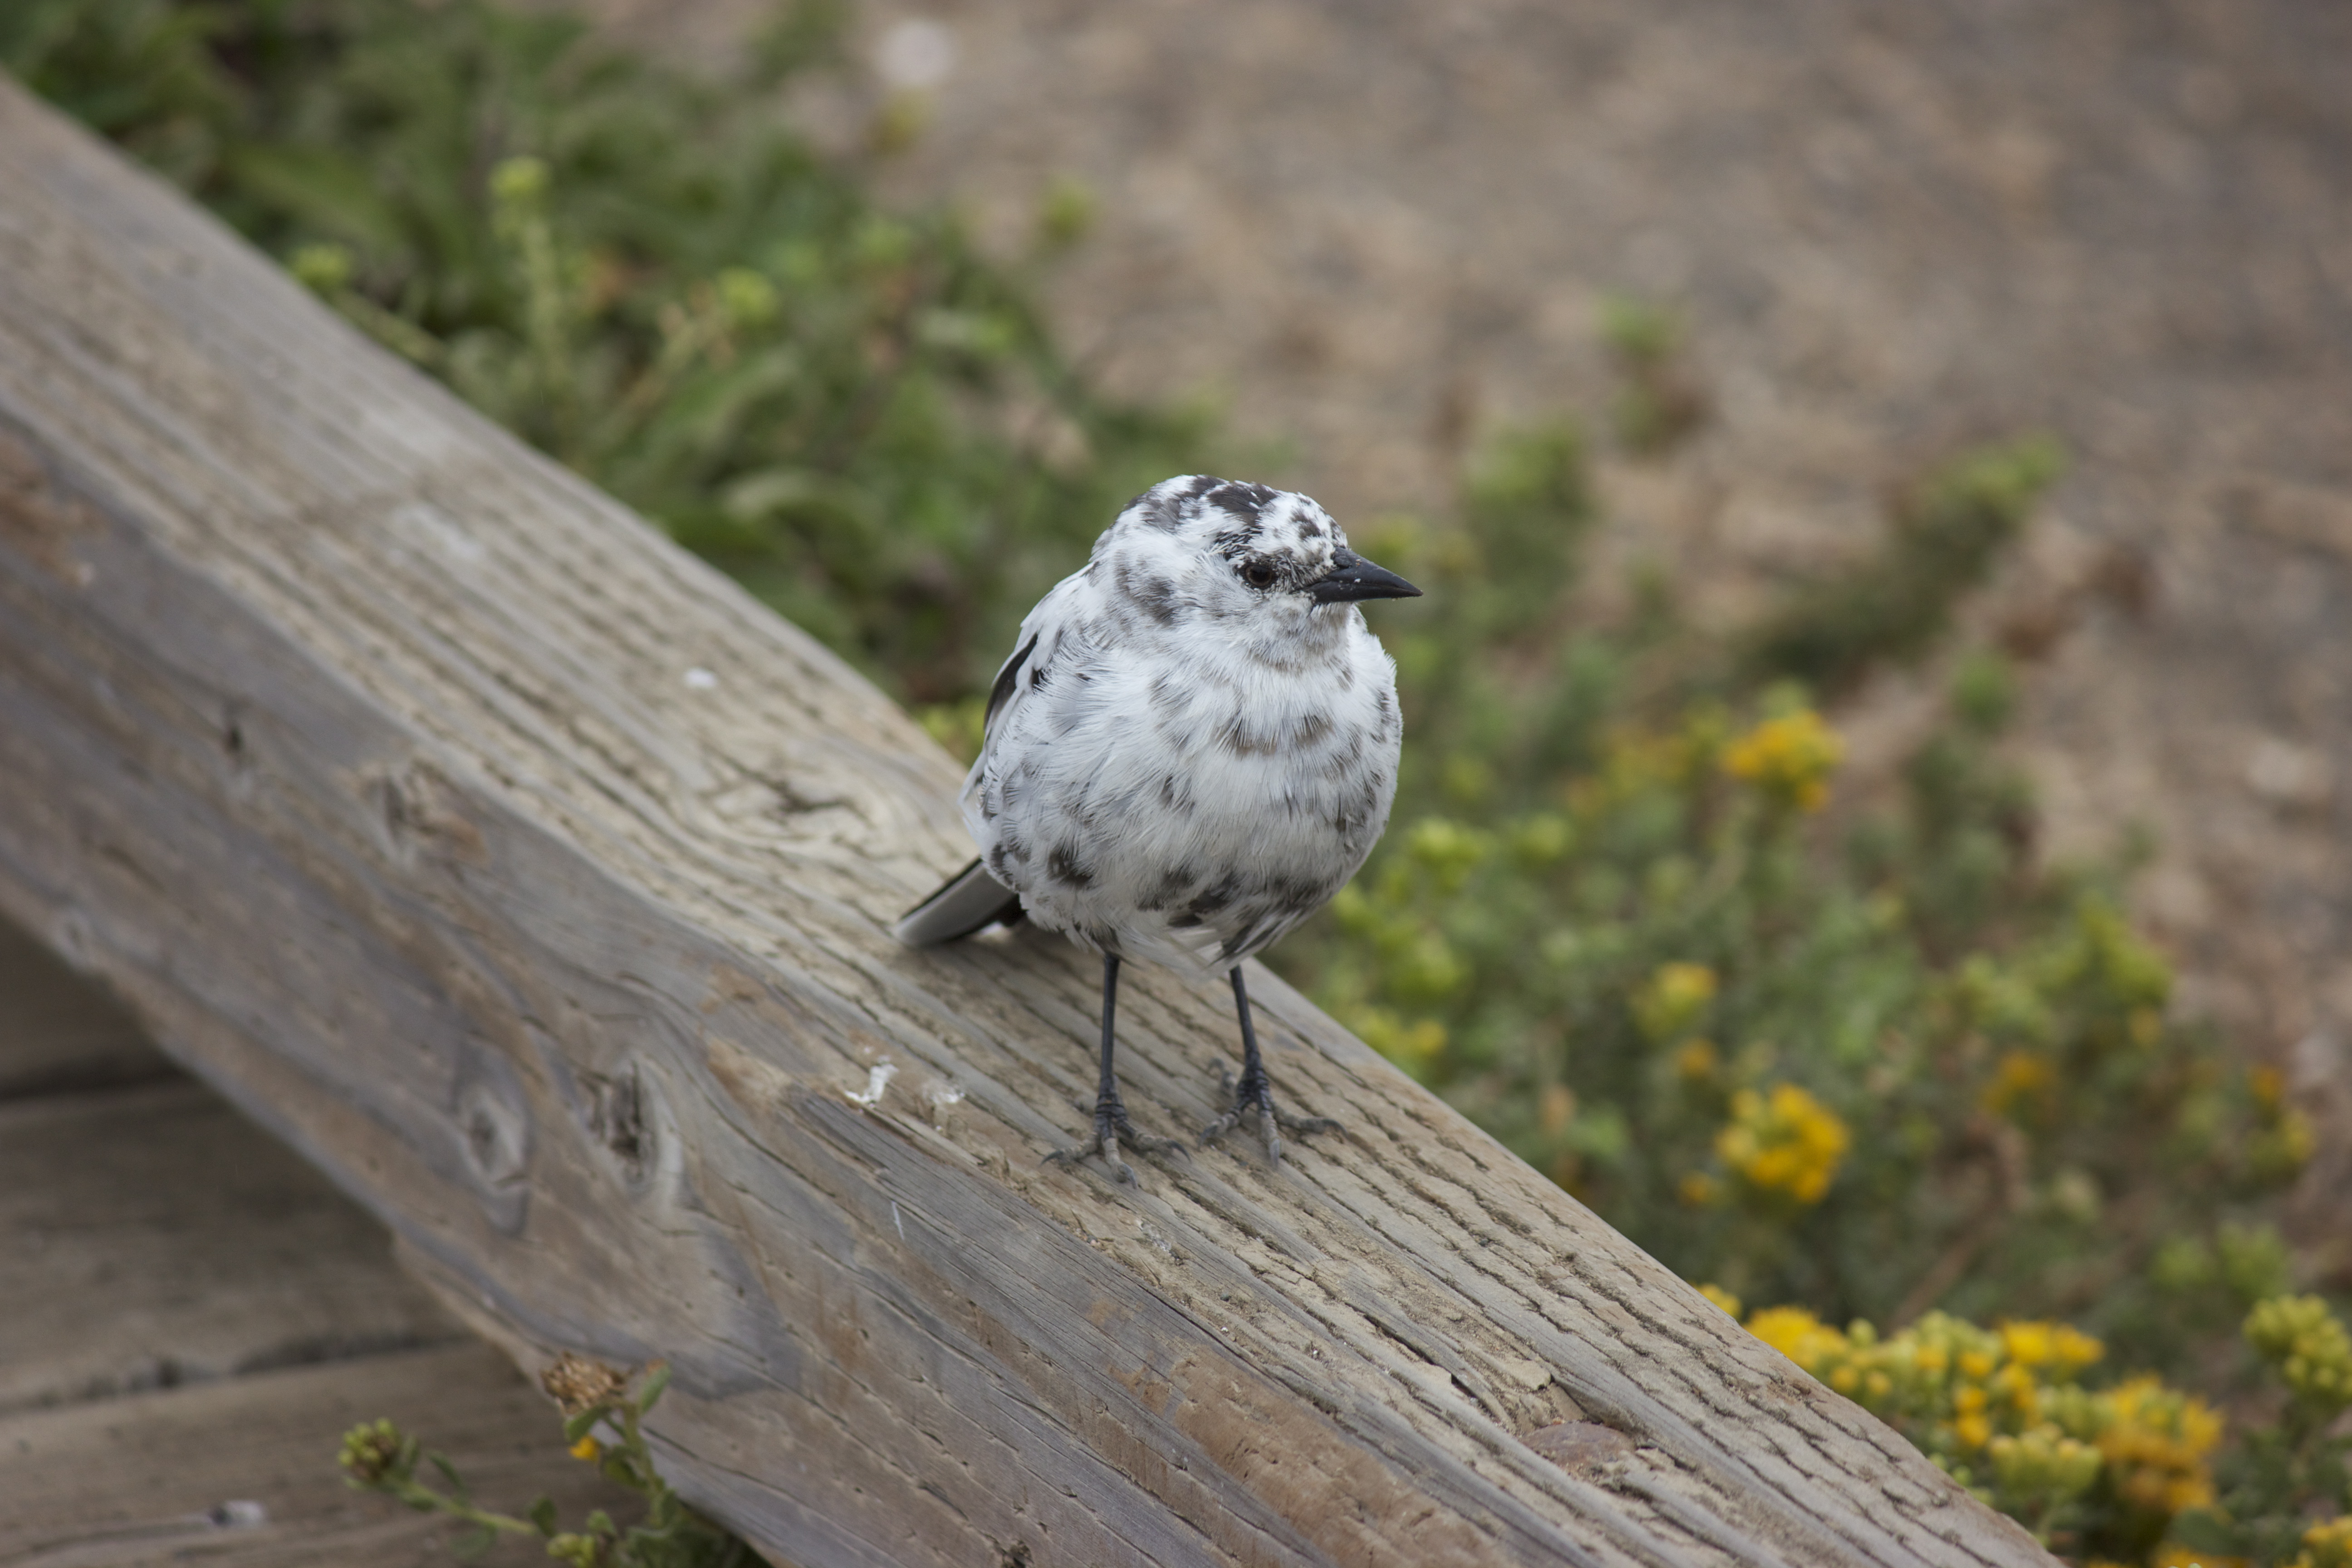 A white and gray spotted bird on the boardwalk. 